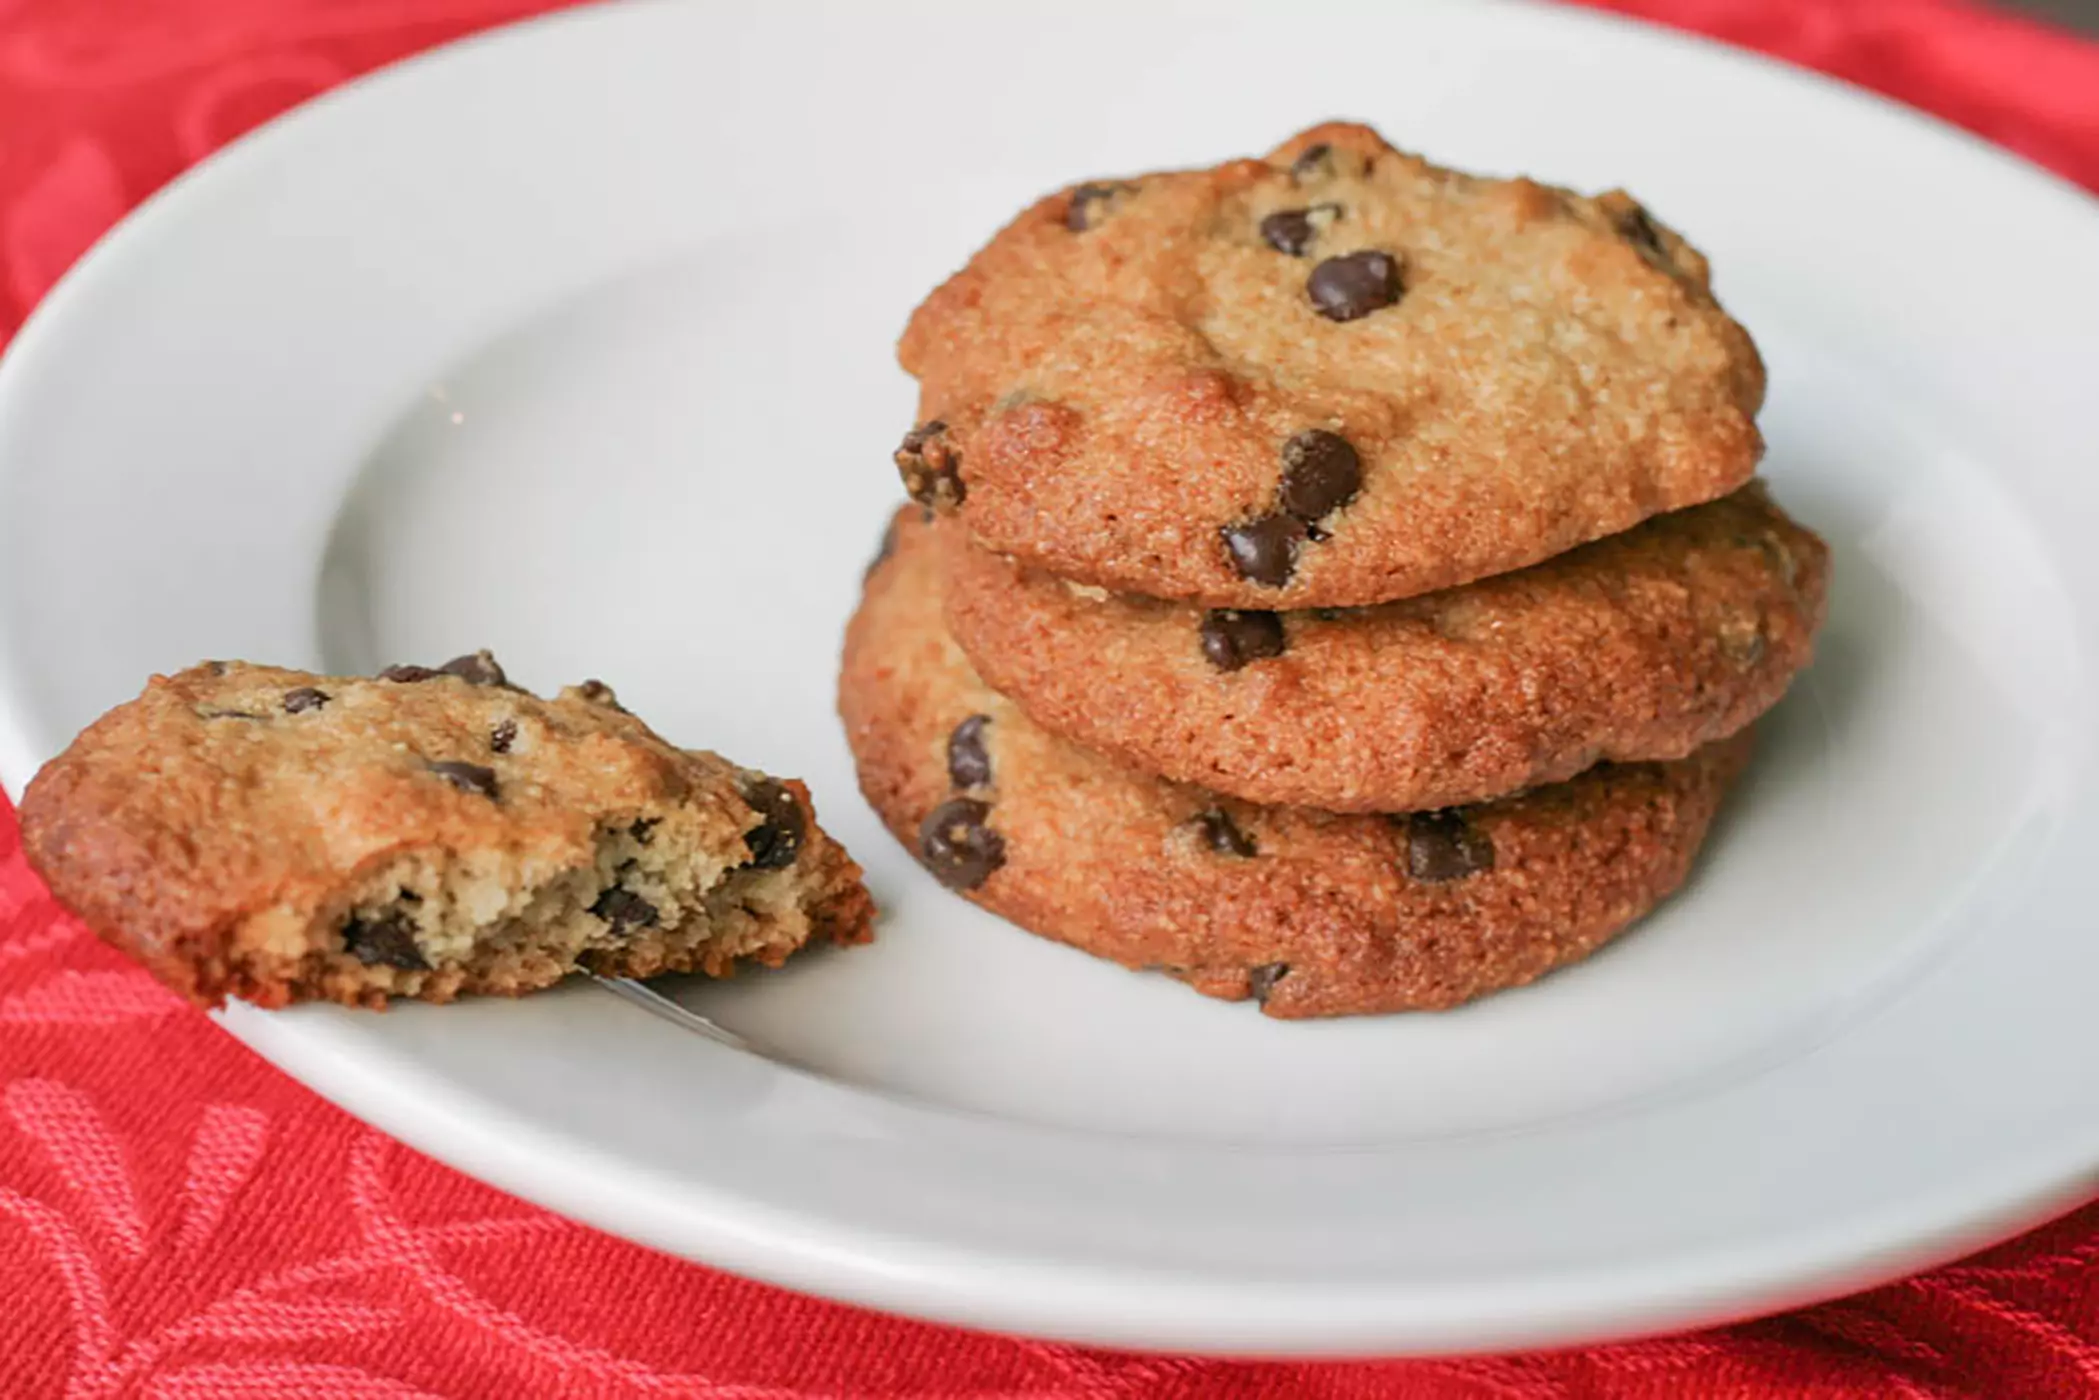 https://comfybelly.com/wp-content/uploads/2010/10/Chocolate-Chip-Cookies-larger.jpg.webp